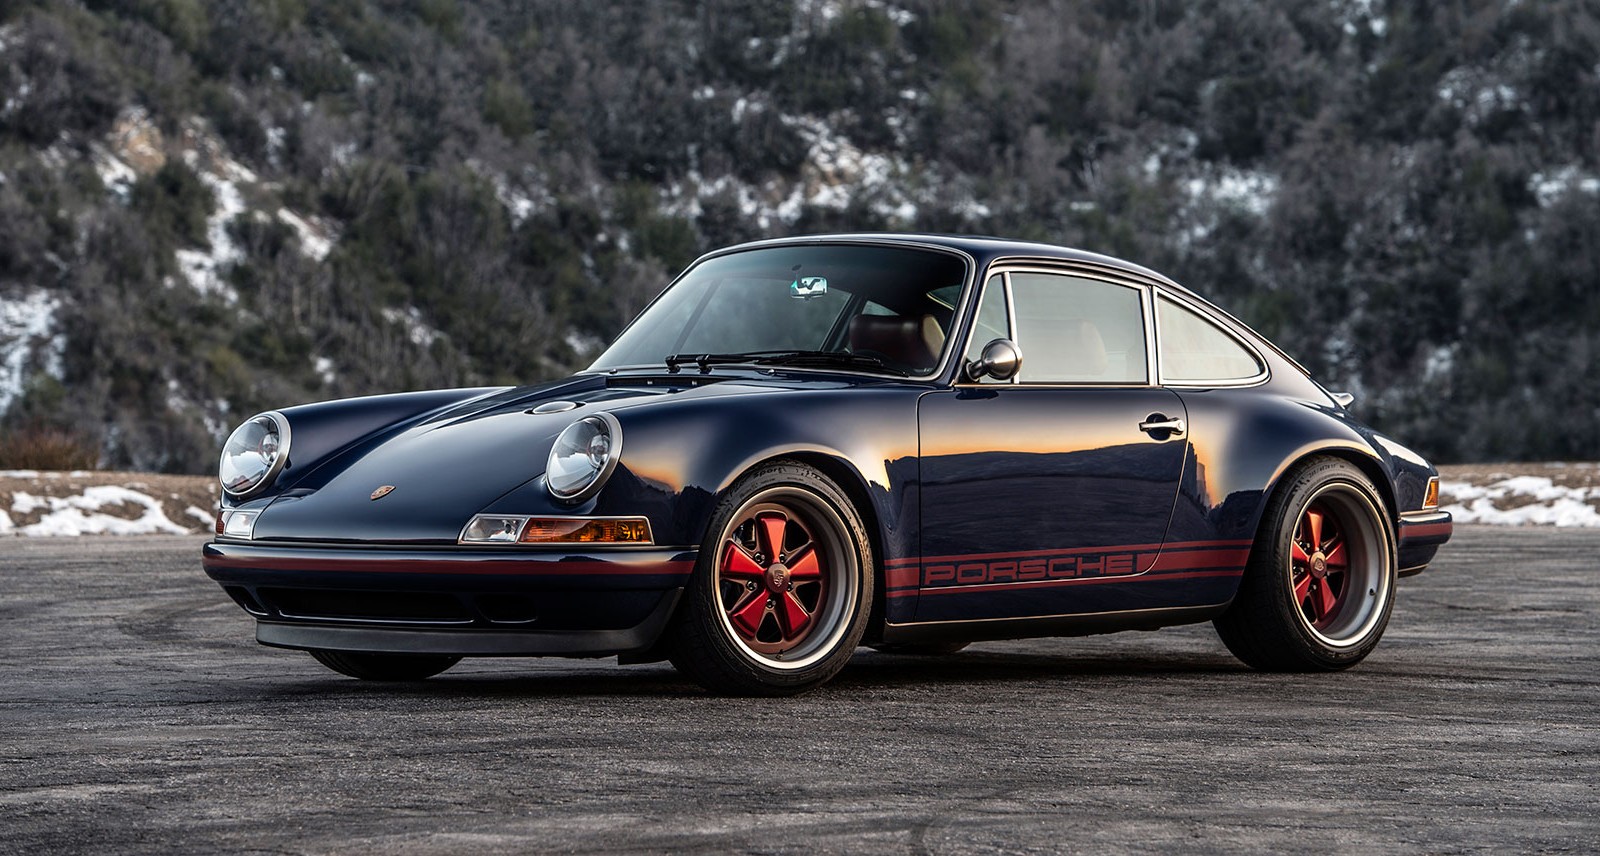 Singer S Latest Porsche Restoration Is A Thing Of